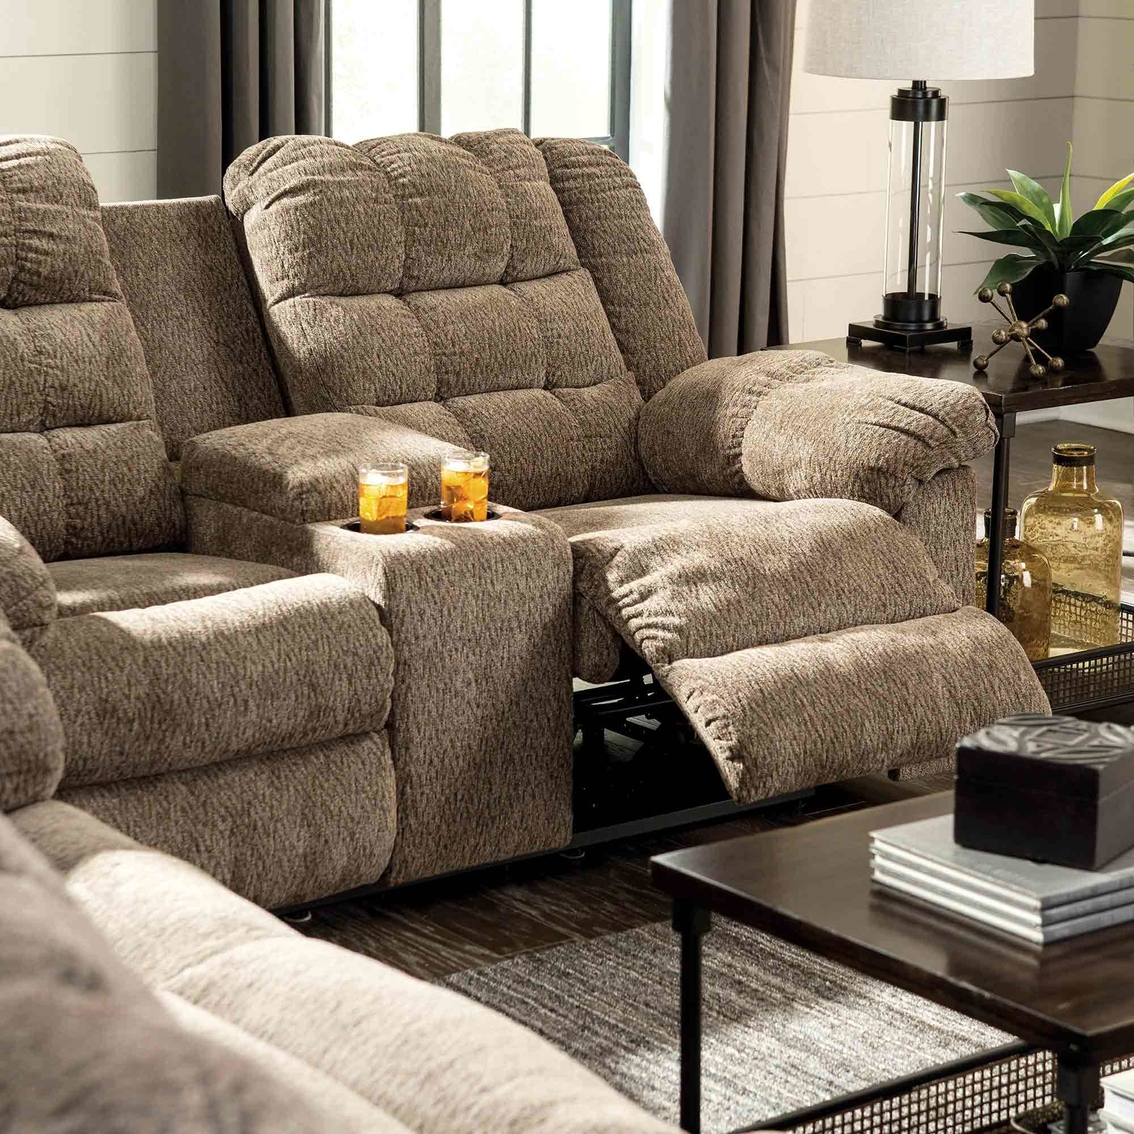 Ashley Workhorse Reclining Loveseat with Console - Image 2 of 3